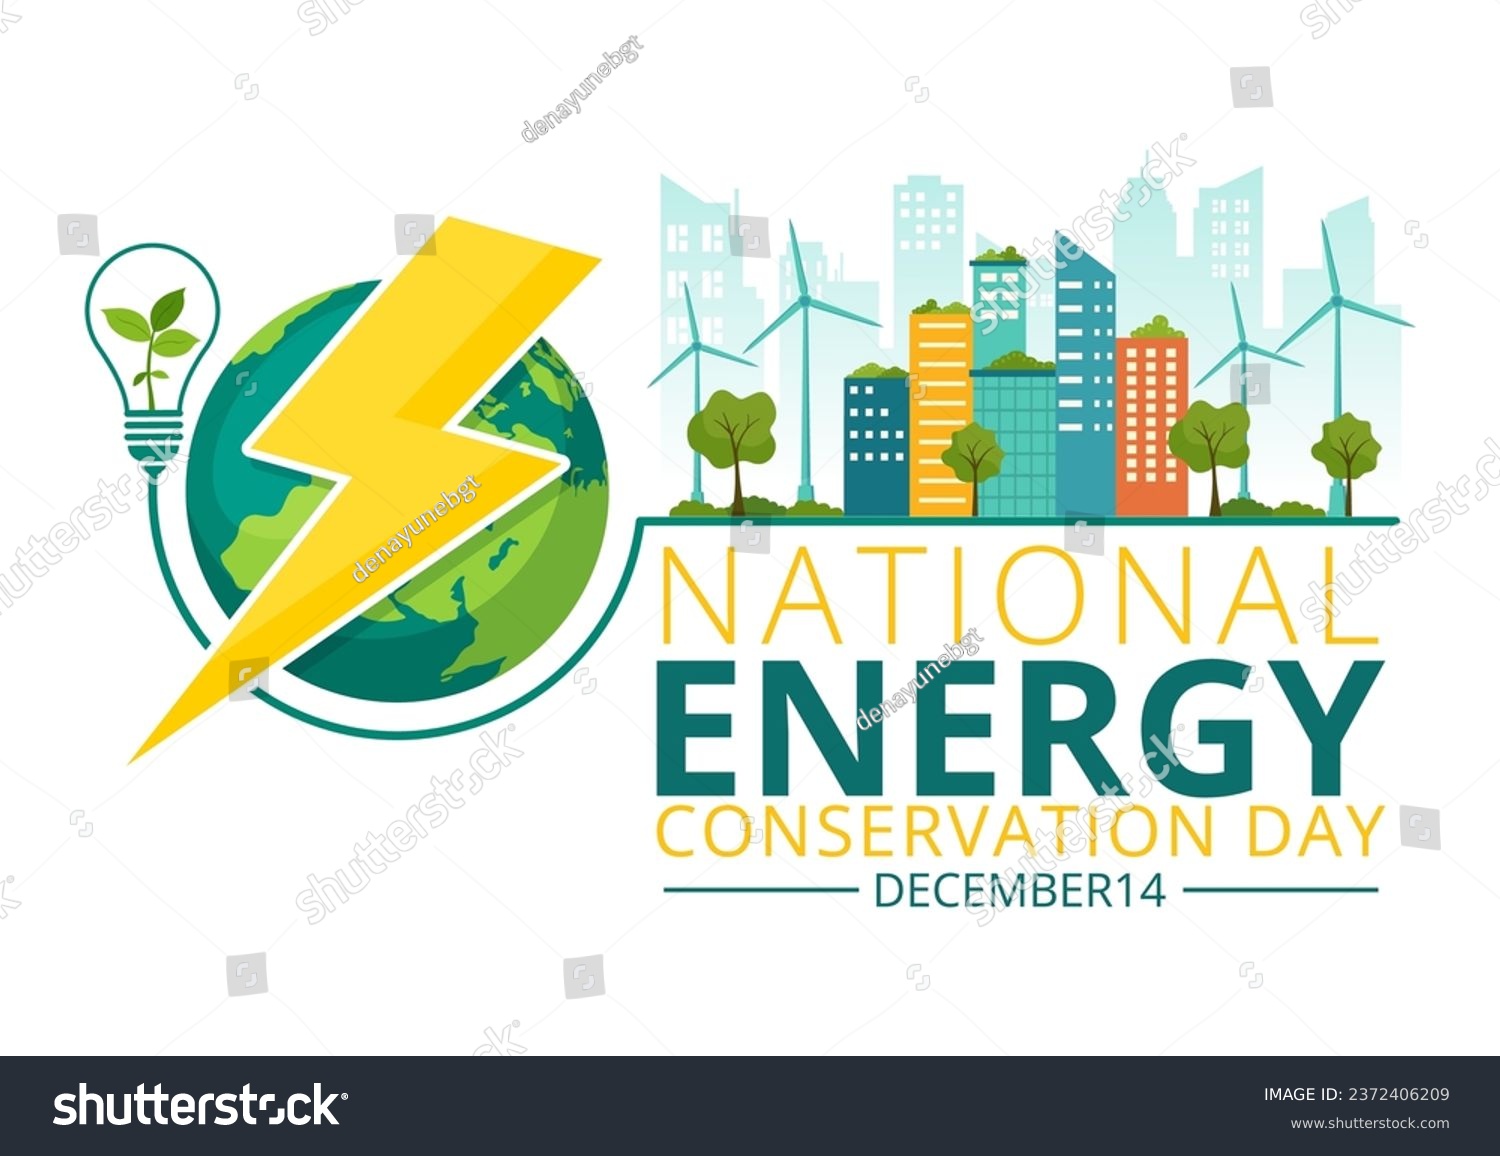 National Energy Conservation Day Vector Illustration on 14 December for Save the Planet and Green Eco Friendly with Lamp and Earth Background Design #2372406209